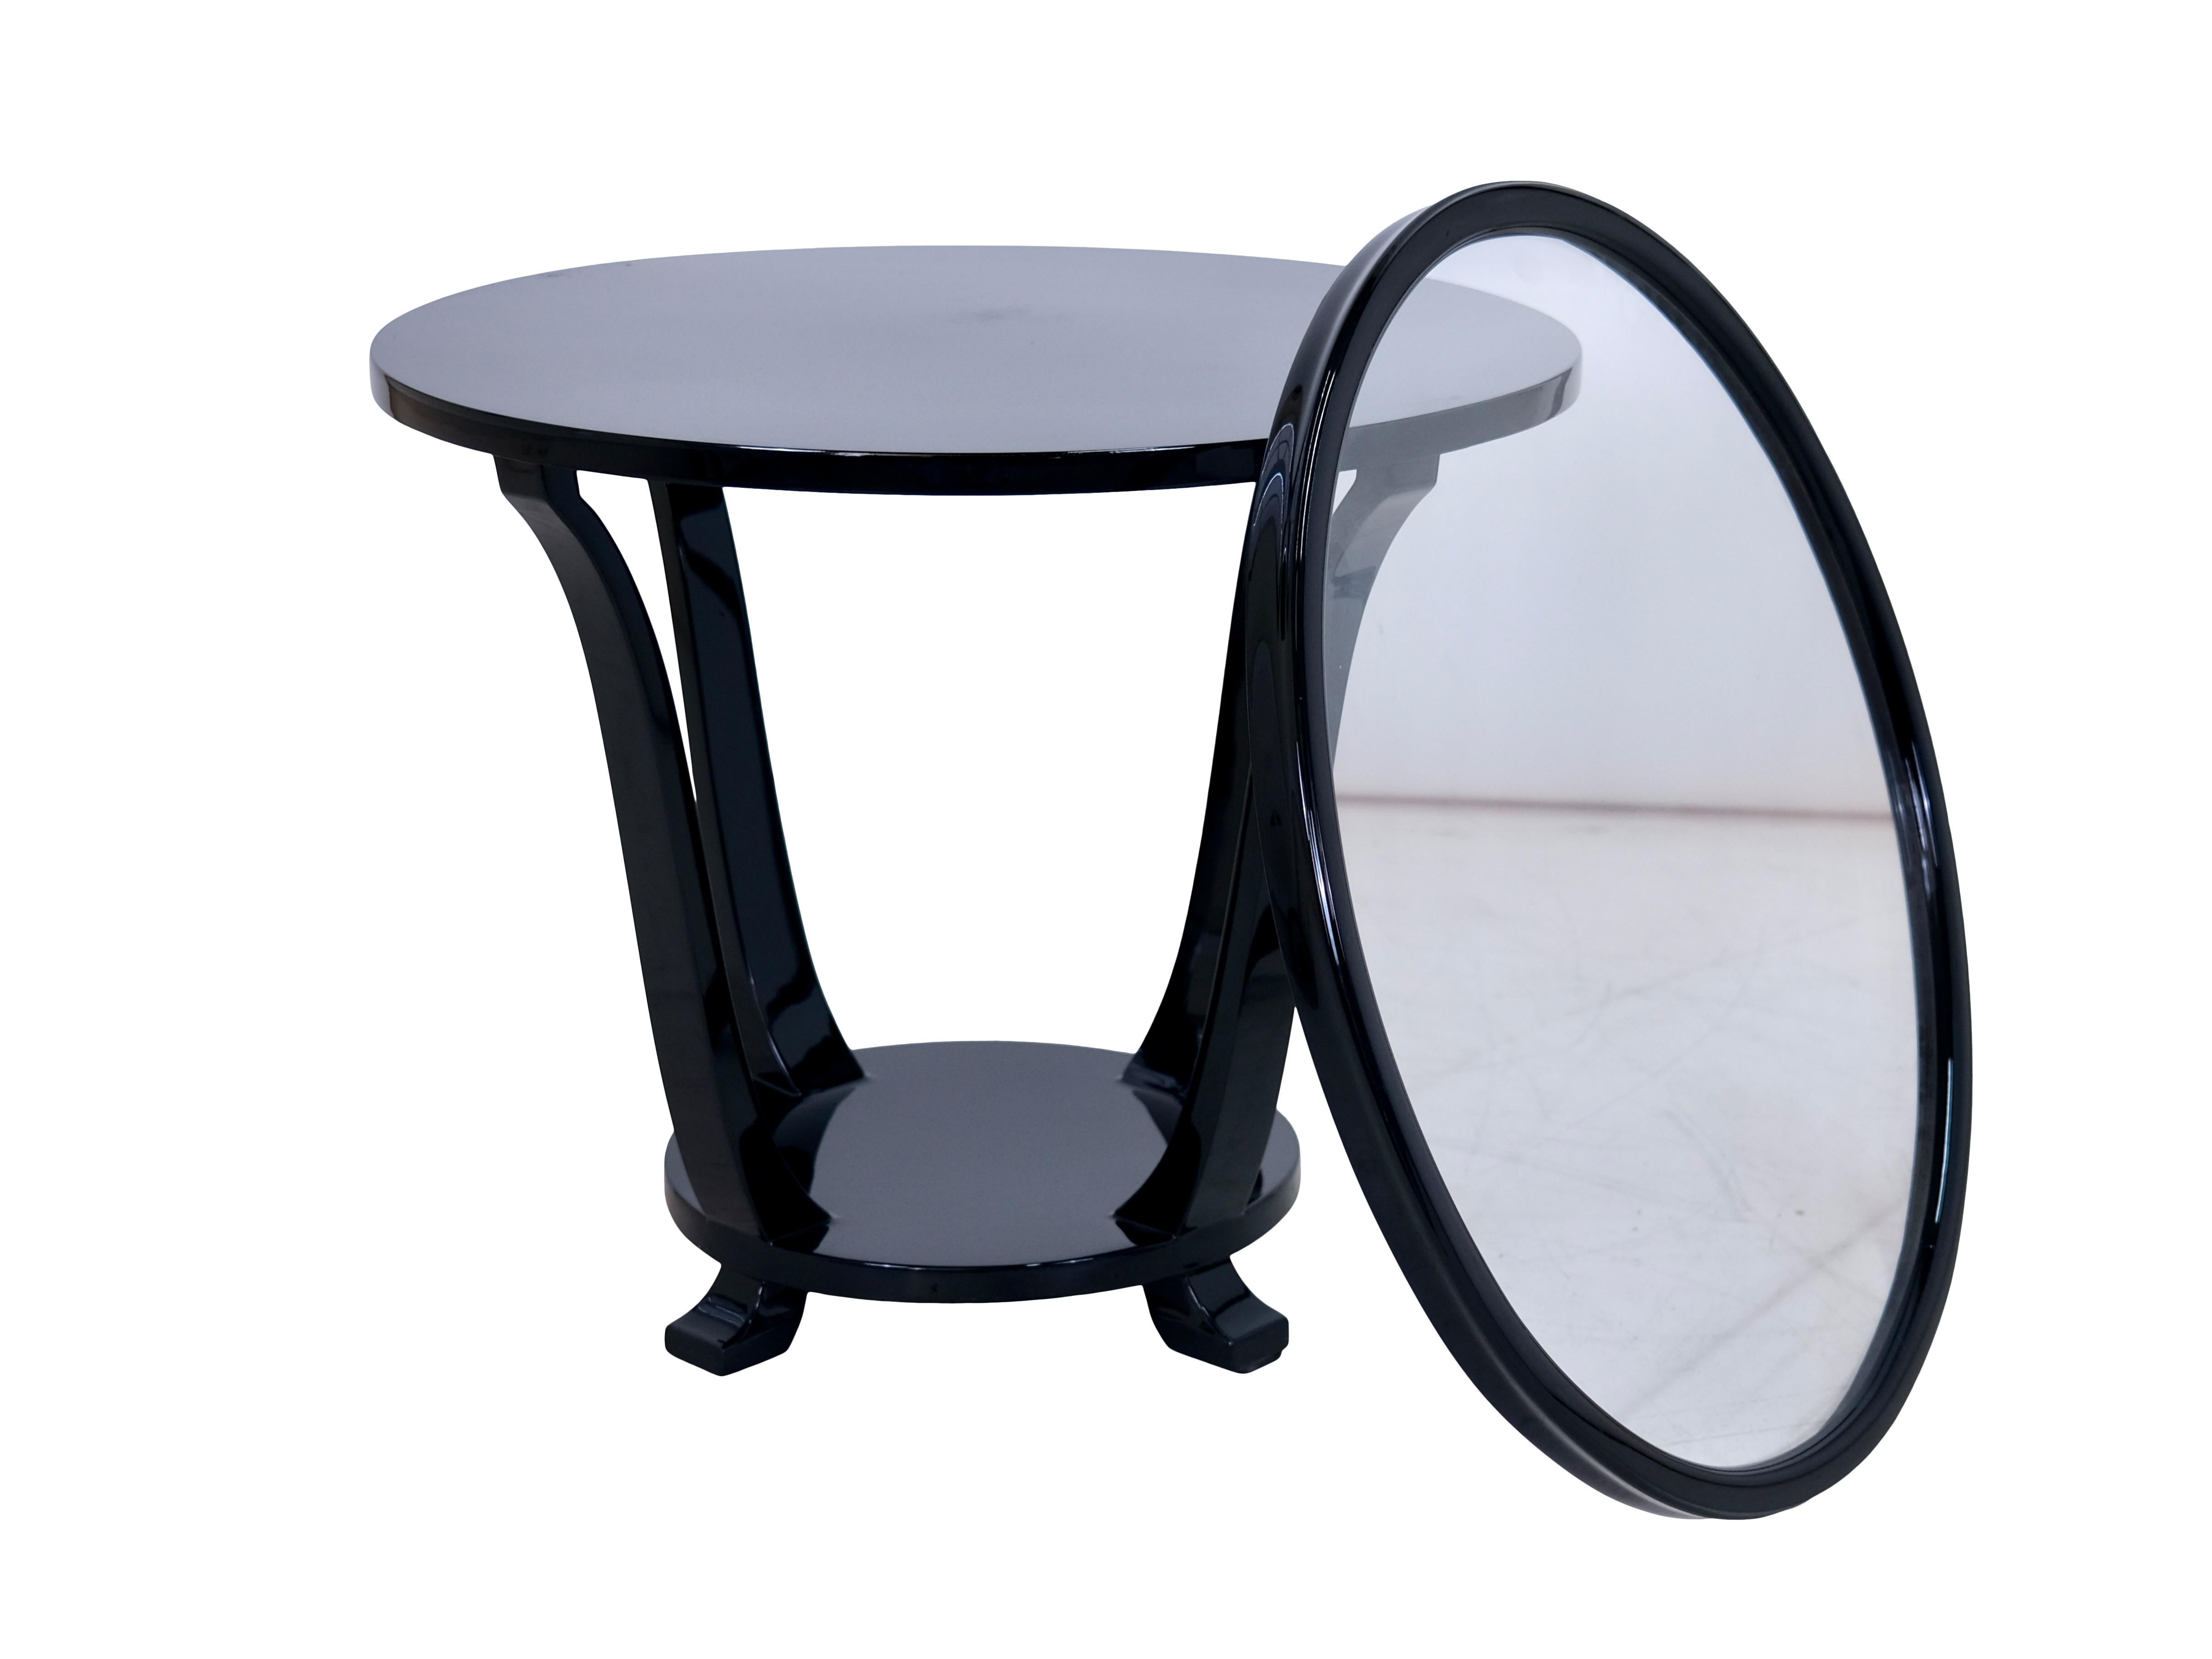 Round Side Table / Coffee Table / Couch Table 
Piano lacquer, black high gloss
Removable tray with glass top

Original Art Deco, France, 1930s

Dimensions:
Diameter: 71 cm
Height: 58 cm. 